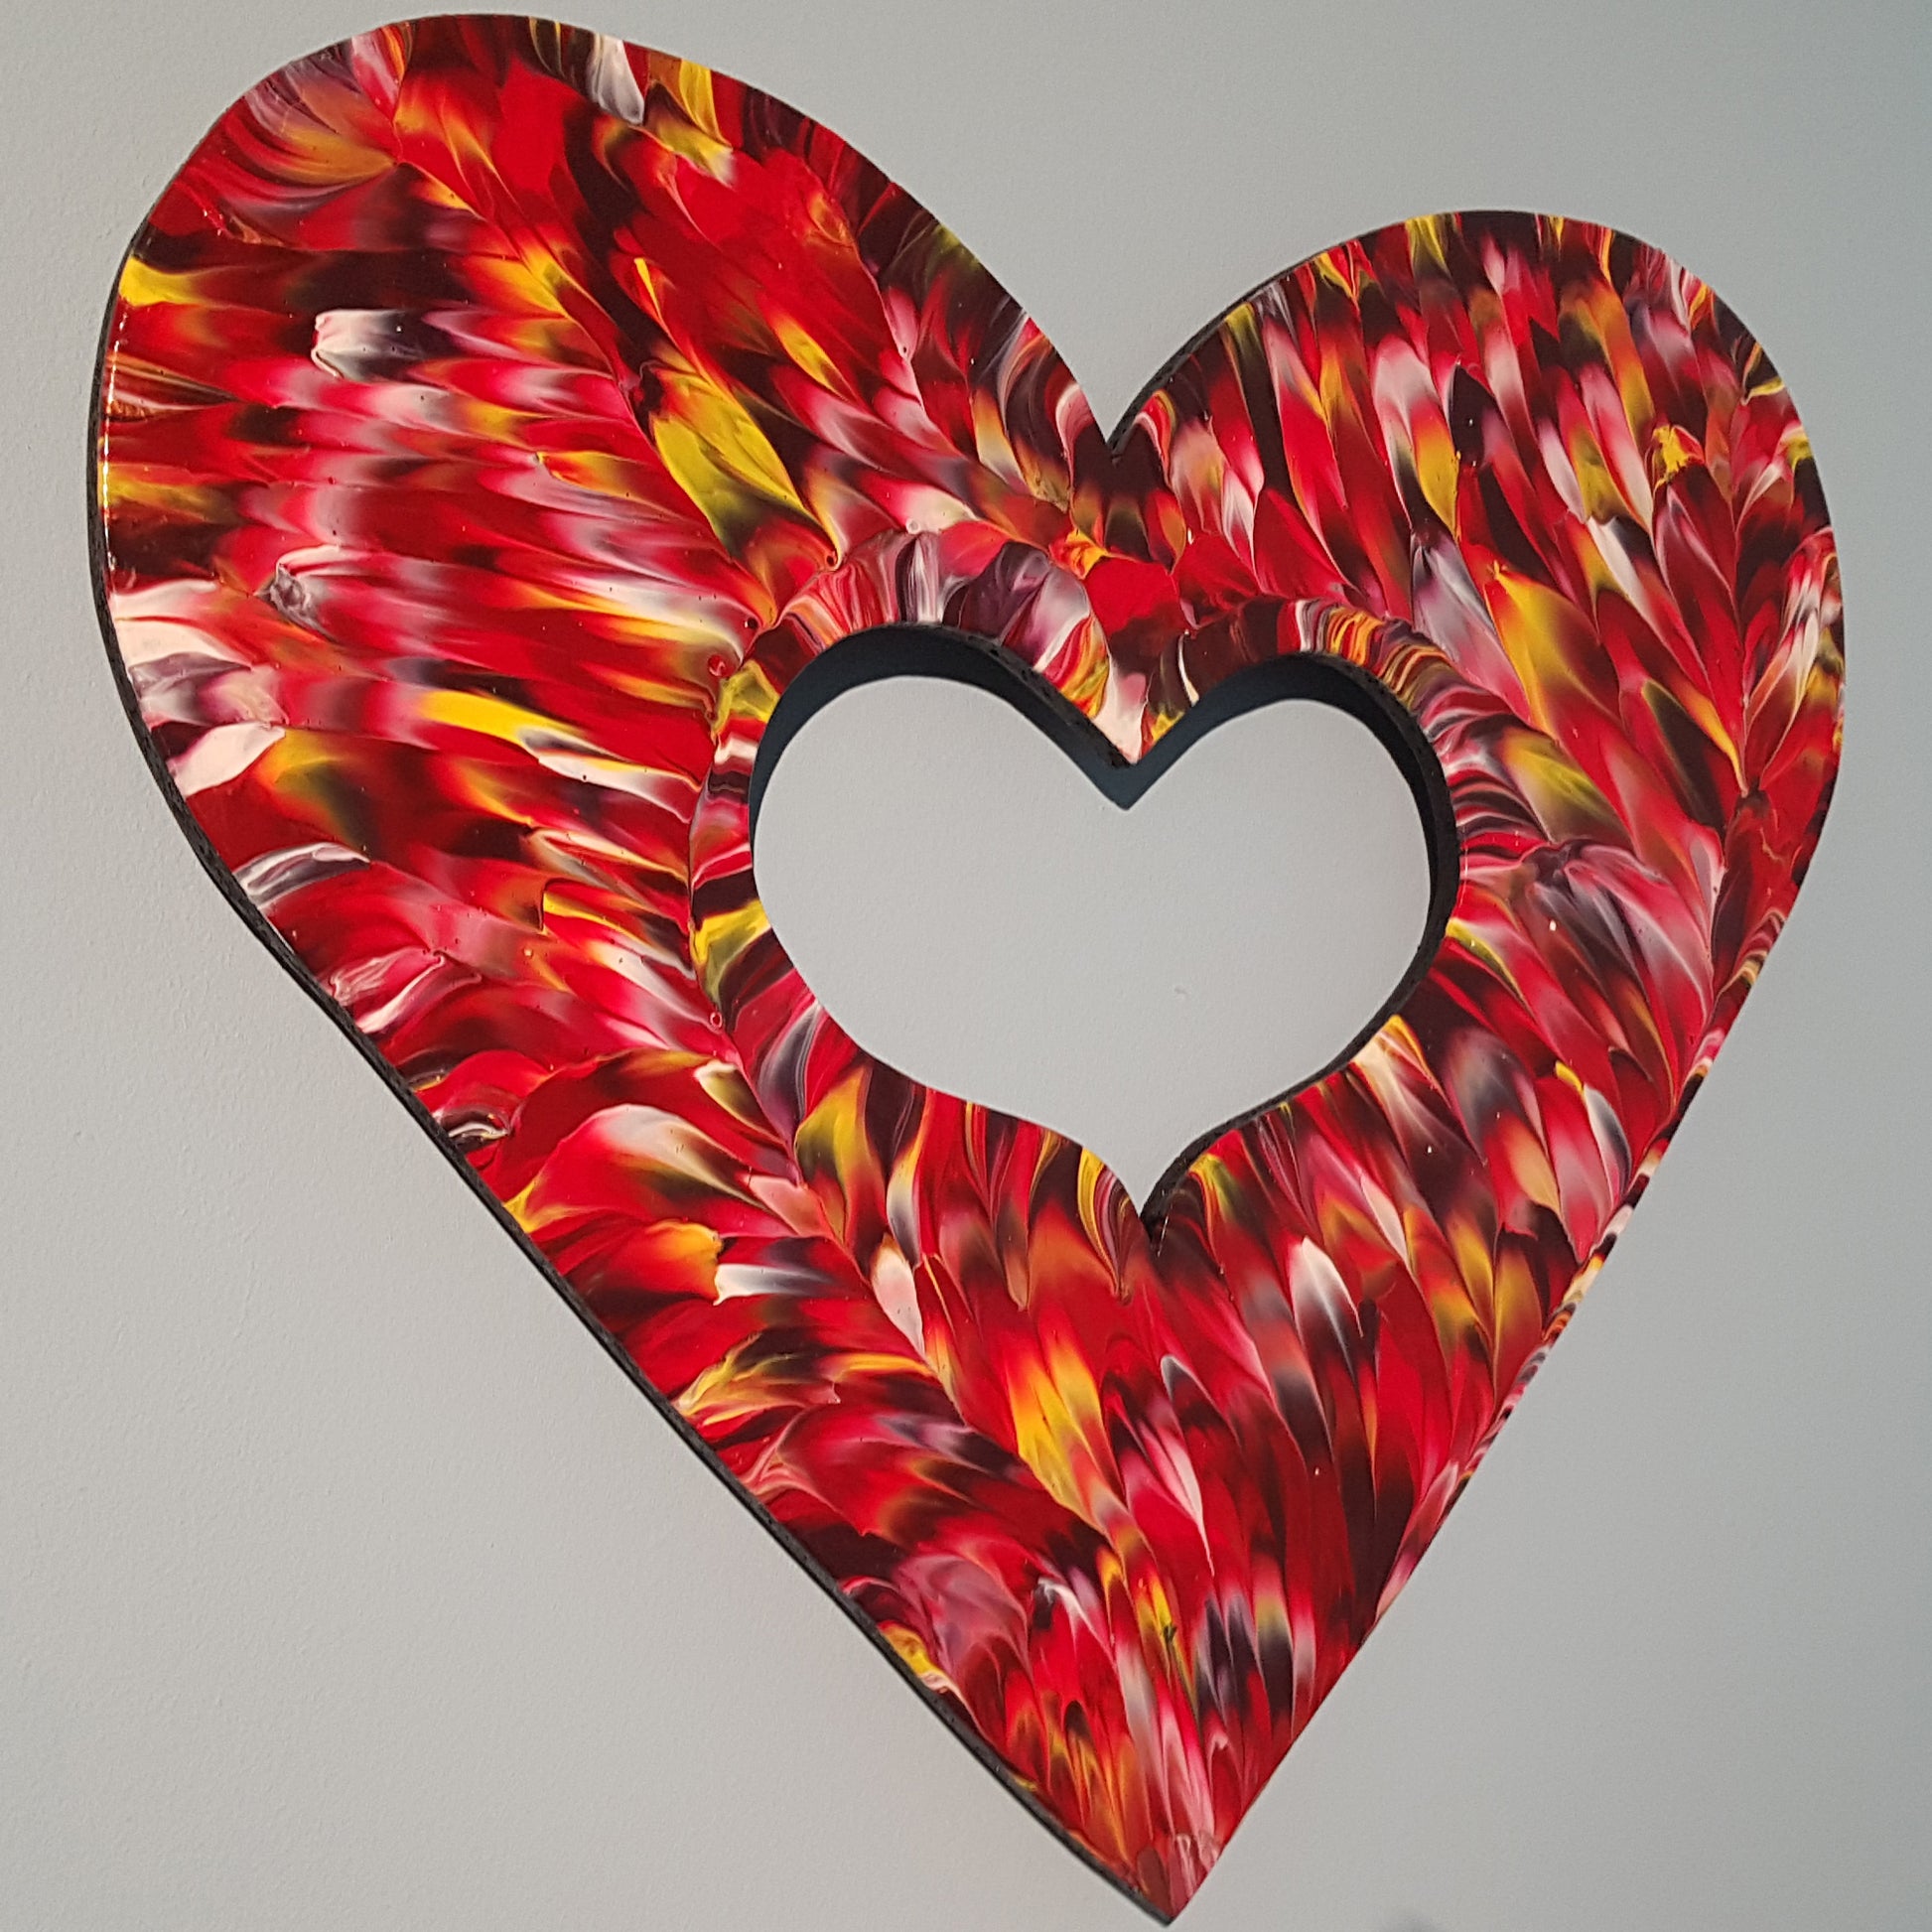 I-Love-You-With-All-My-Art-by-Alexandra-Romano-Unique-Abstracts-Red-Heart-Shaped-Custom-Made-Paintings-Toronto-Artists-Gallery